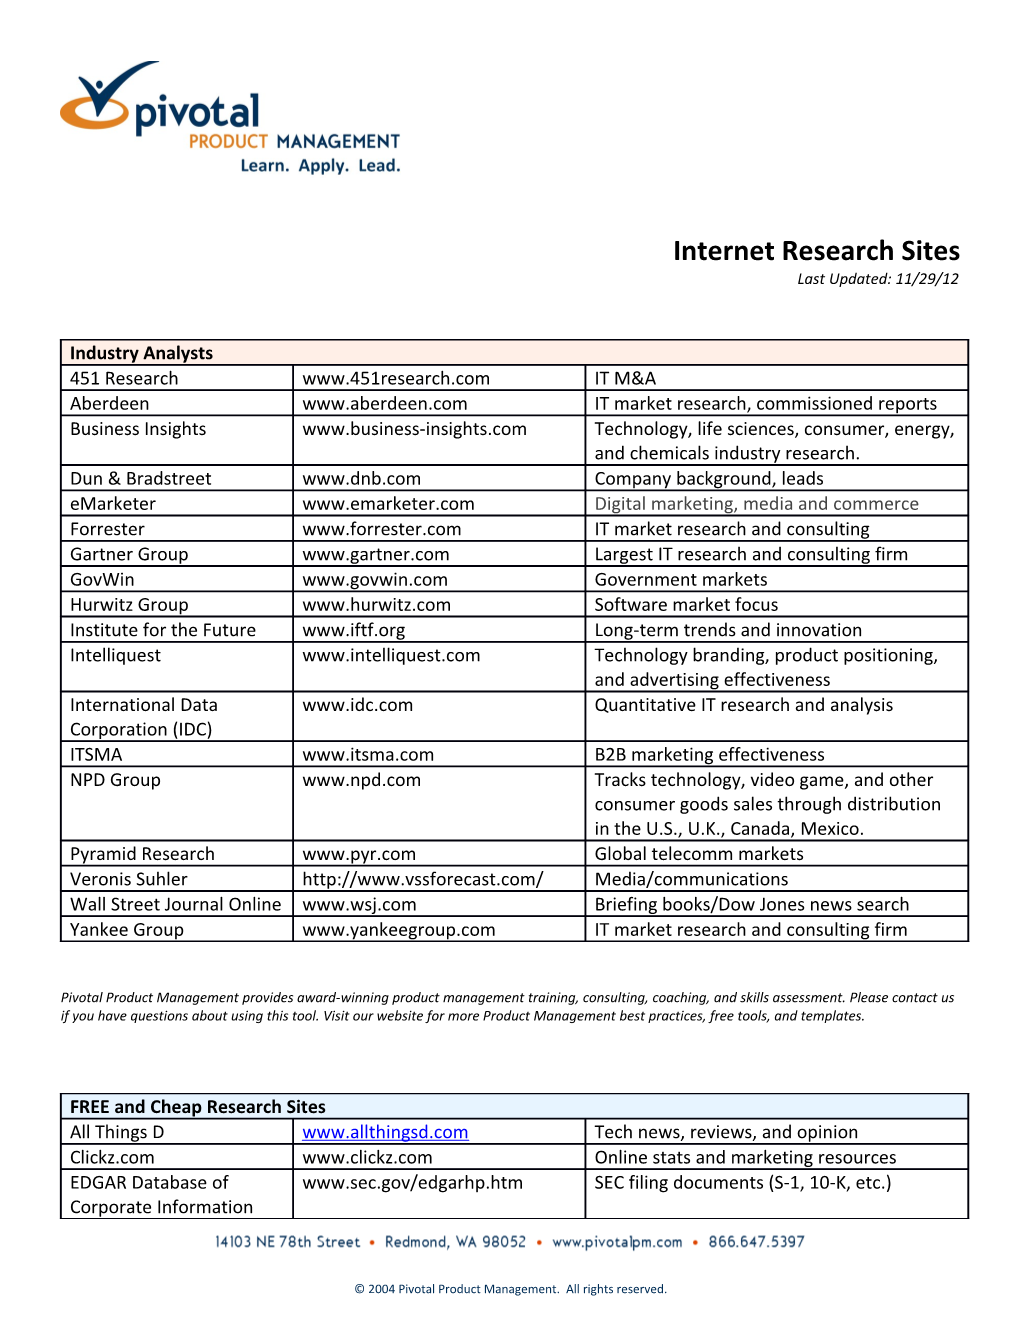 Internet Research Sites Last Updated: 11/29/12